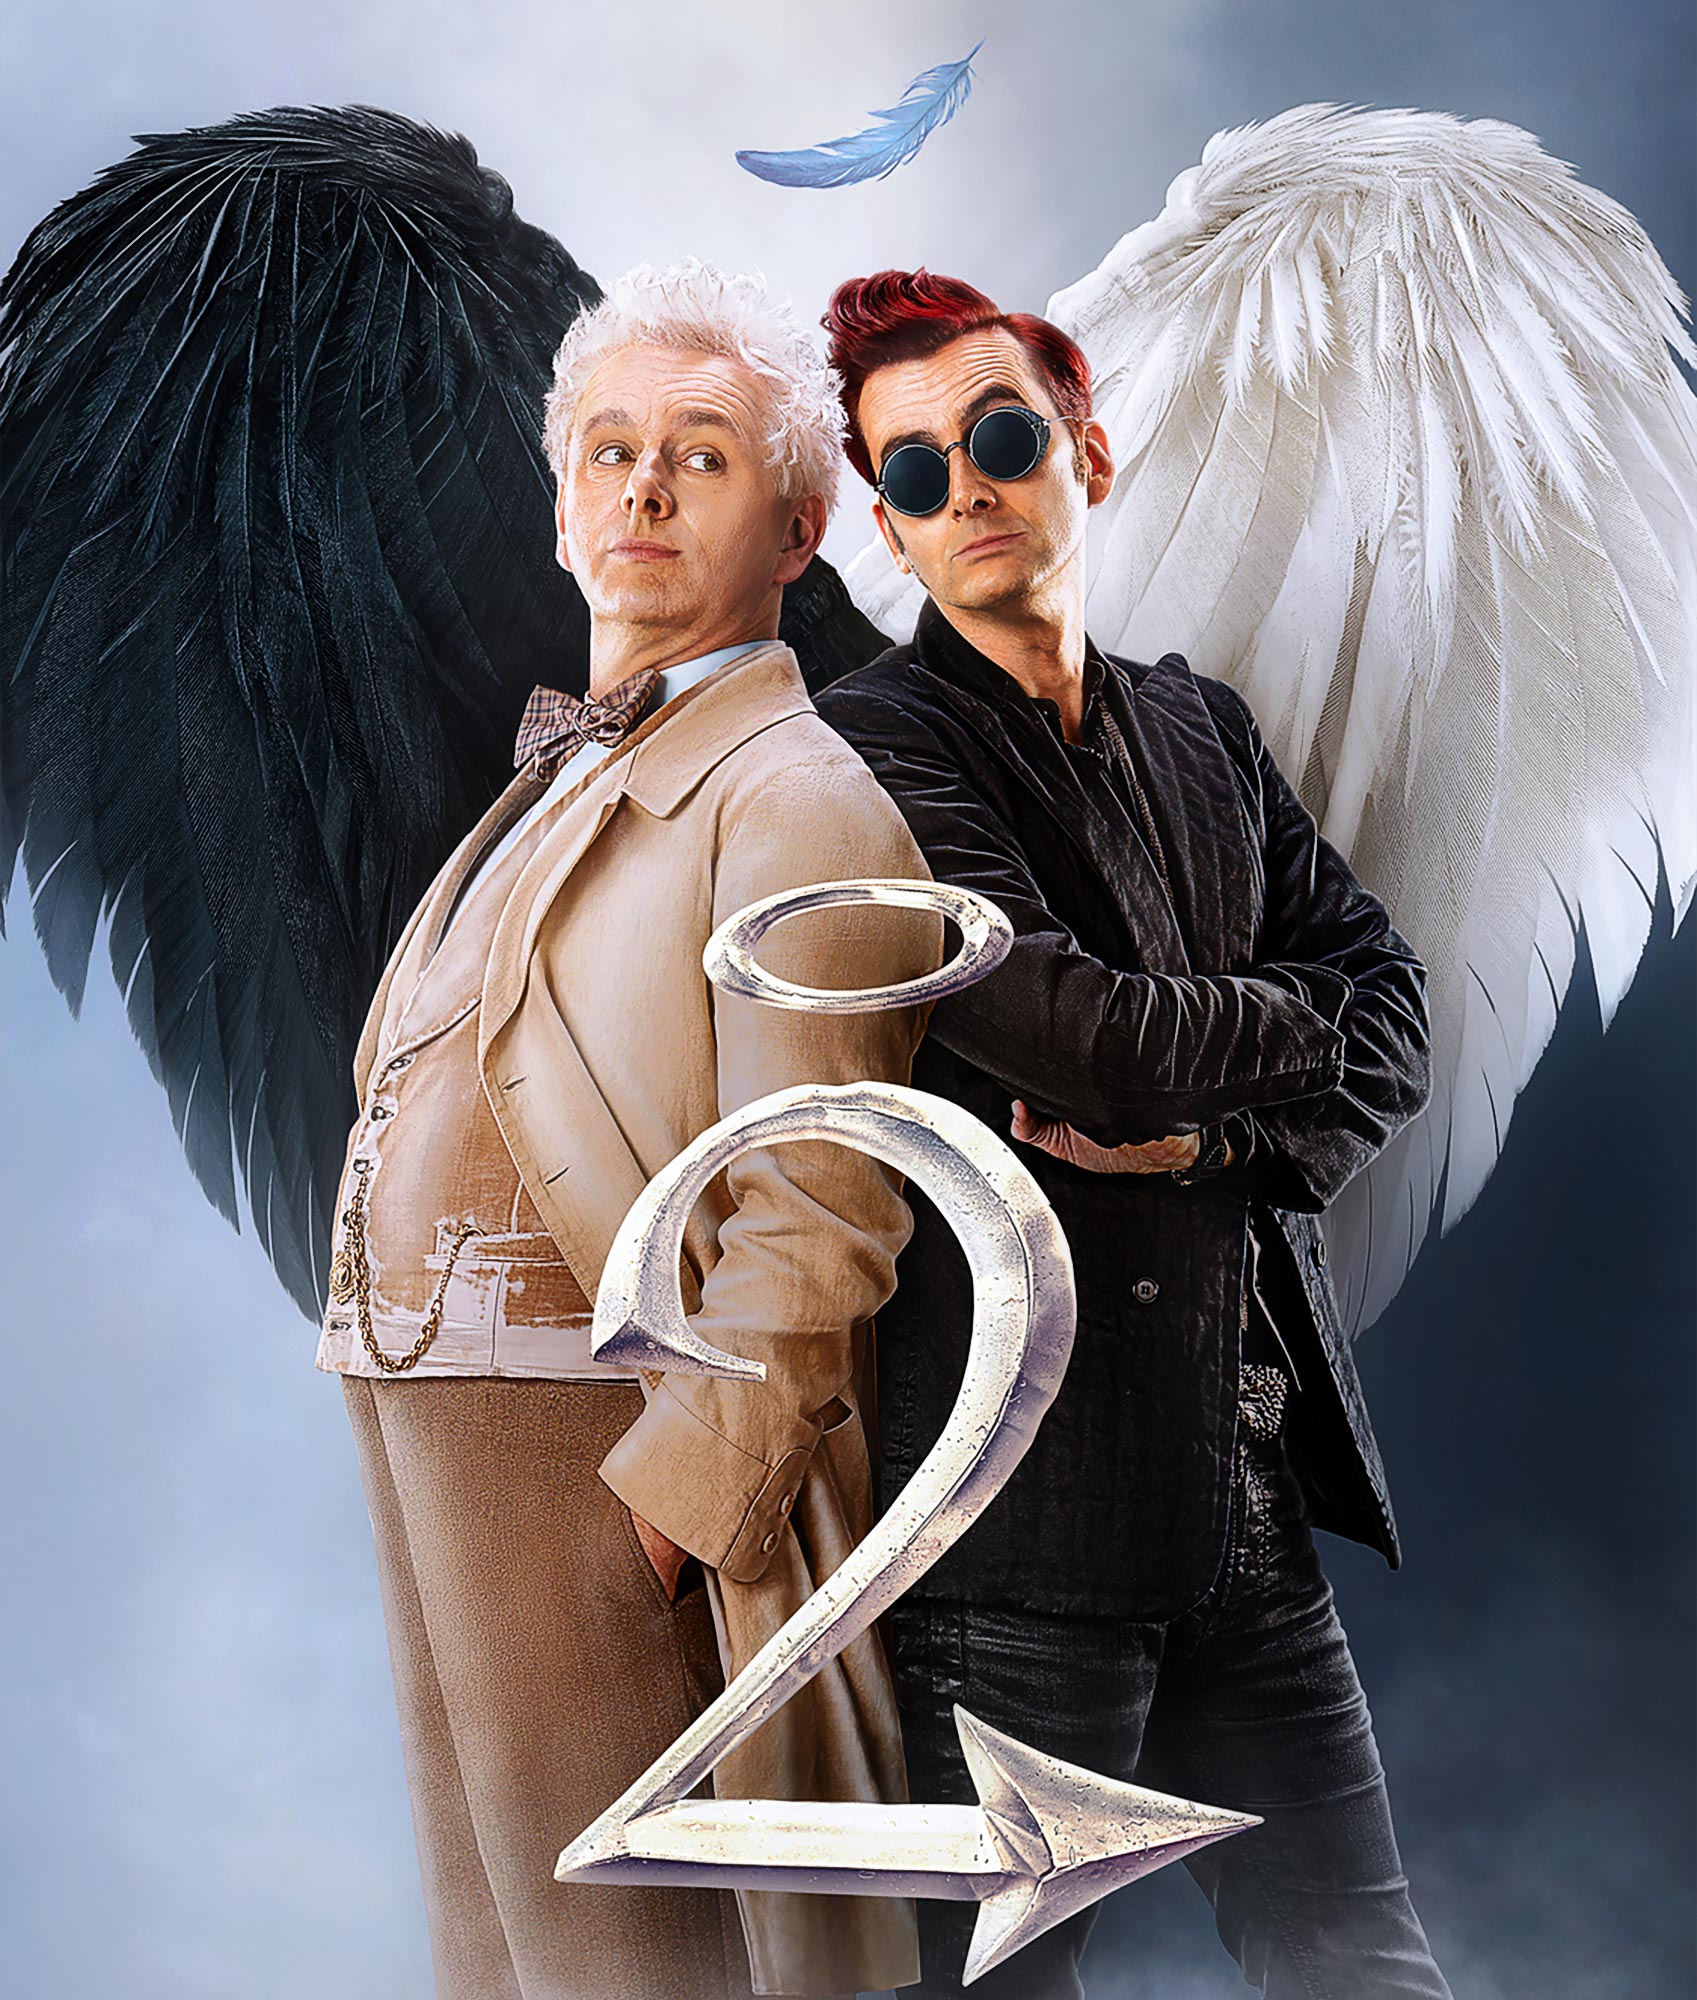 https://www.usmagazine.com/wp-content/uploads/2023/07/Everything-to-Know-About-the-Good-Omens-Unexpected-2nd-Season-Plot-Details-Cast-and-More-467.jpg?quality=86&strip=all